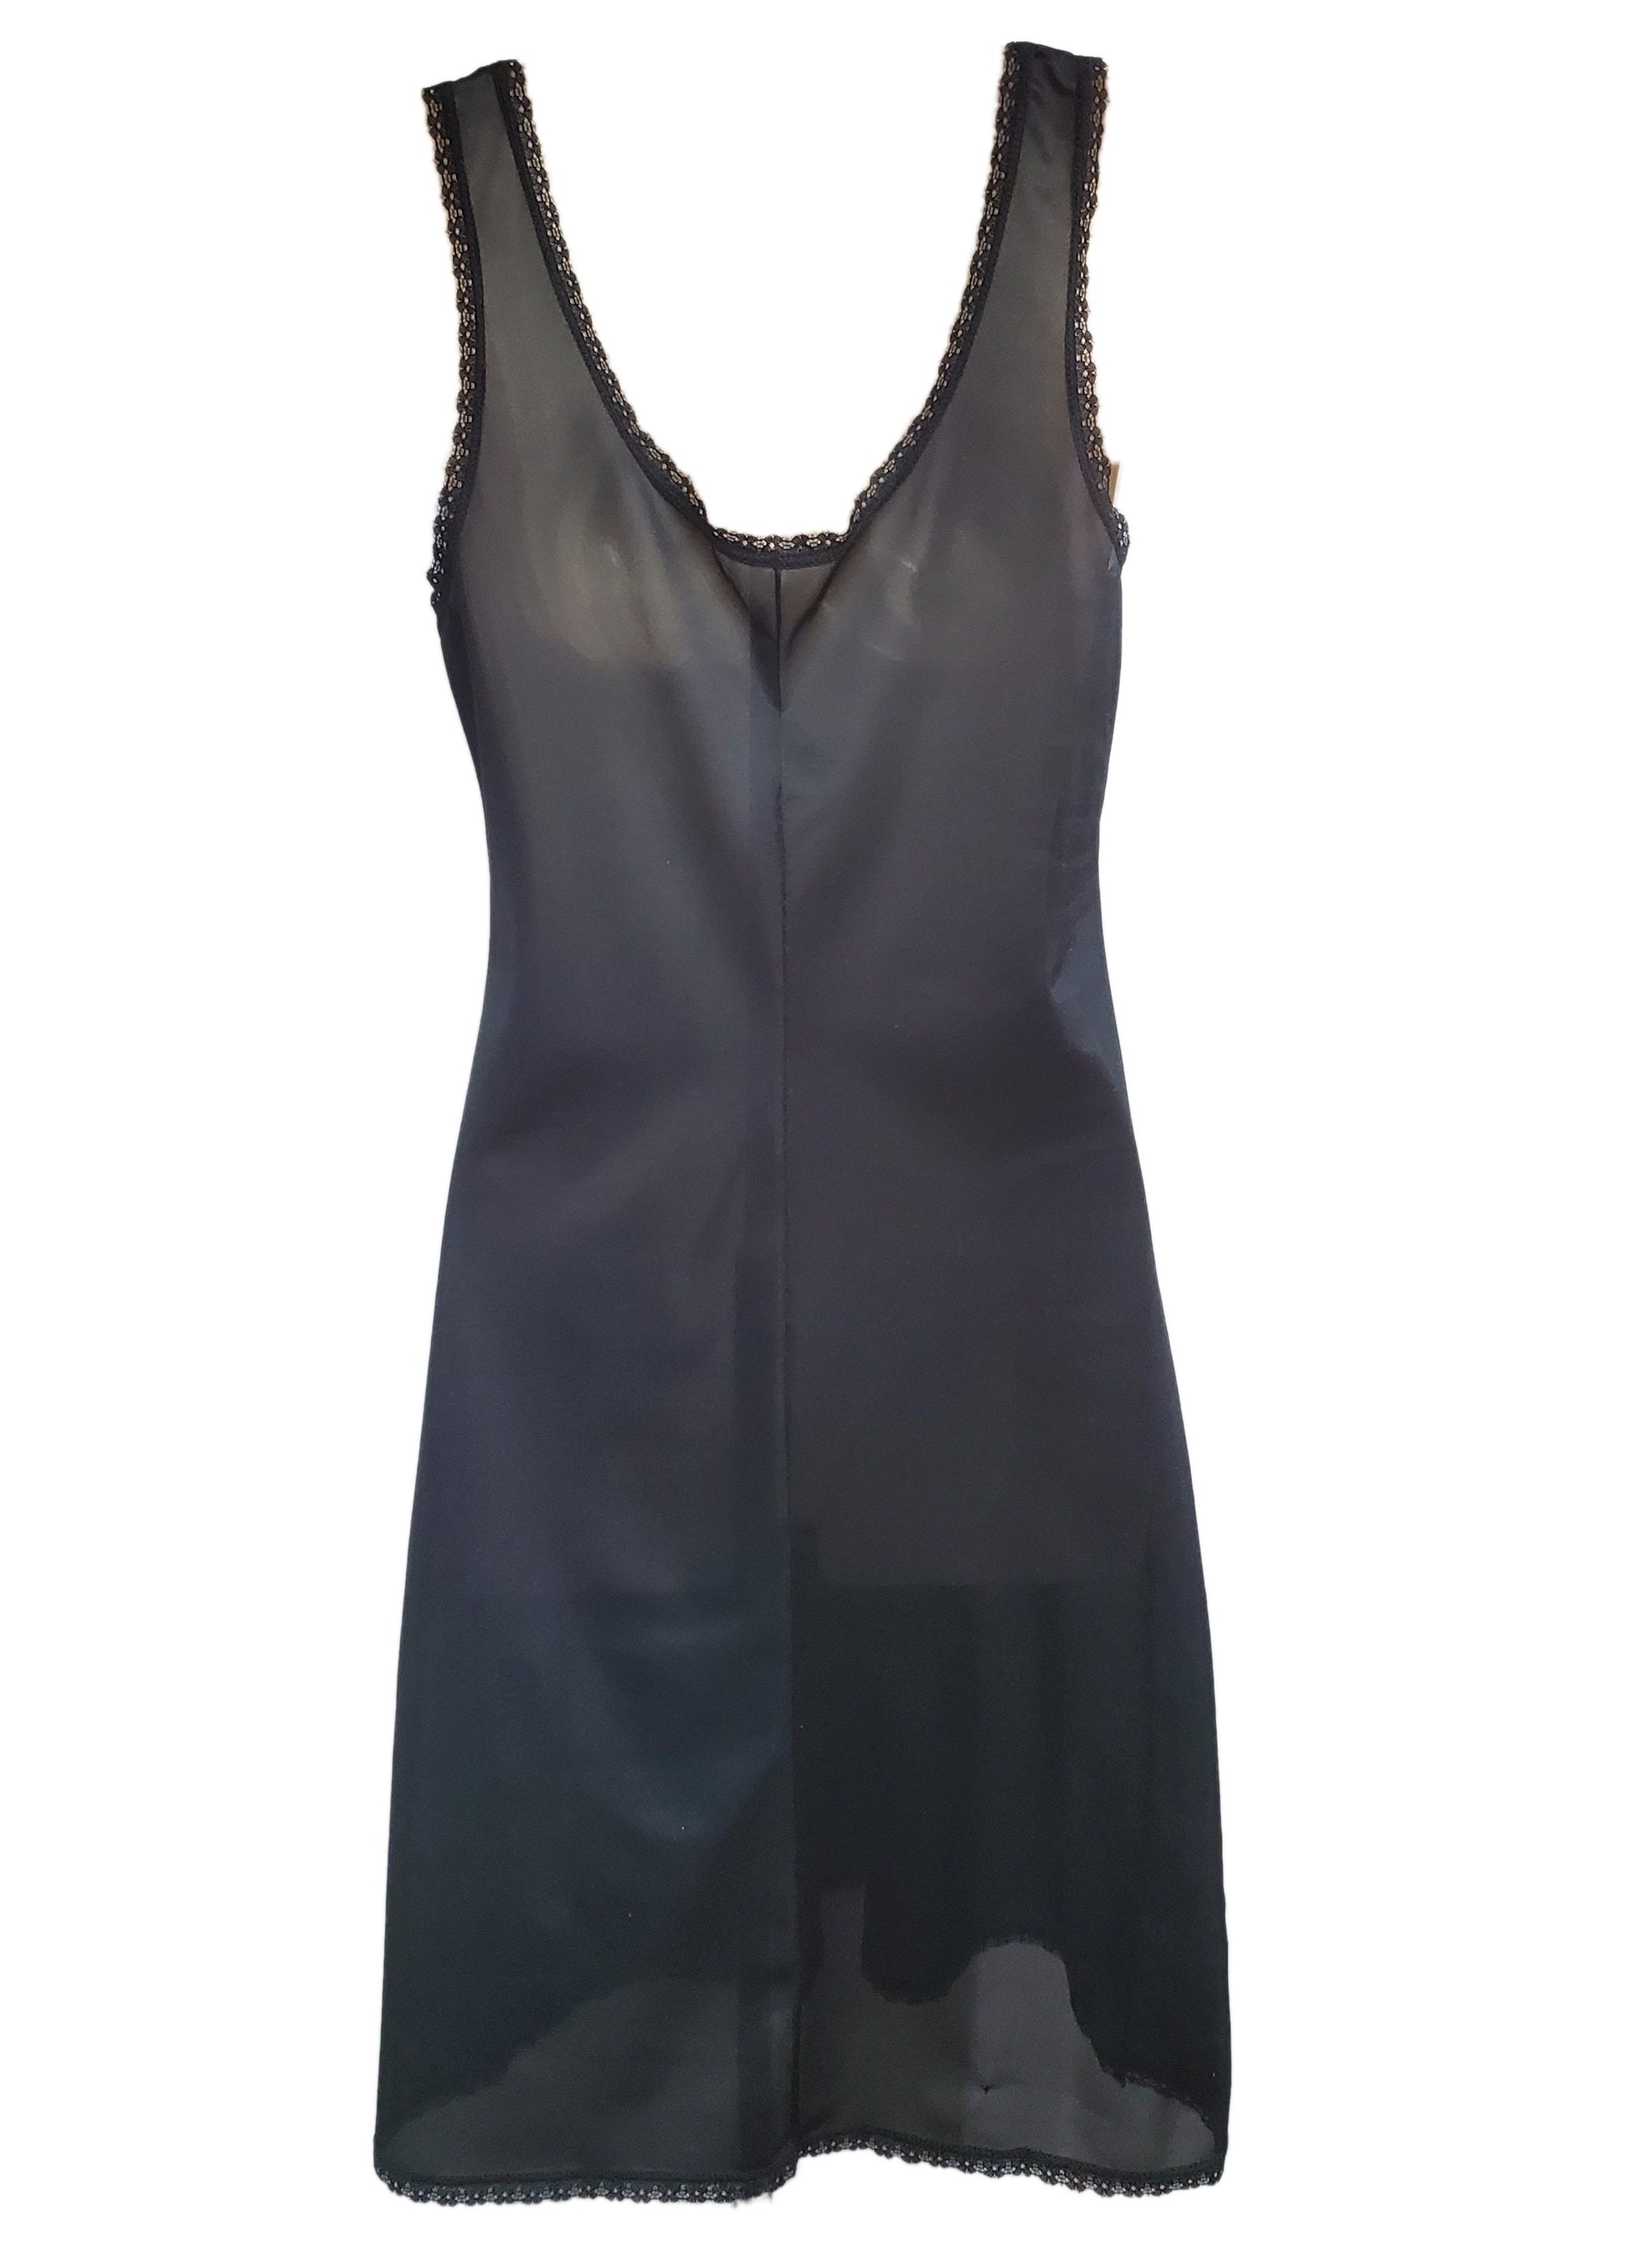 Classic sheen slip from the Basic line by Andra from Italy at Di Moda Lingerie Toronto.